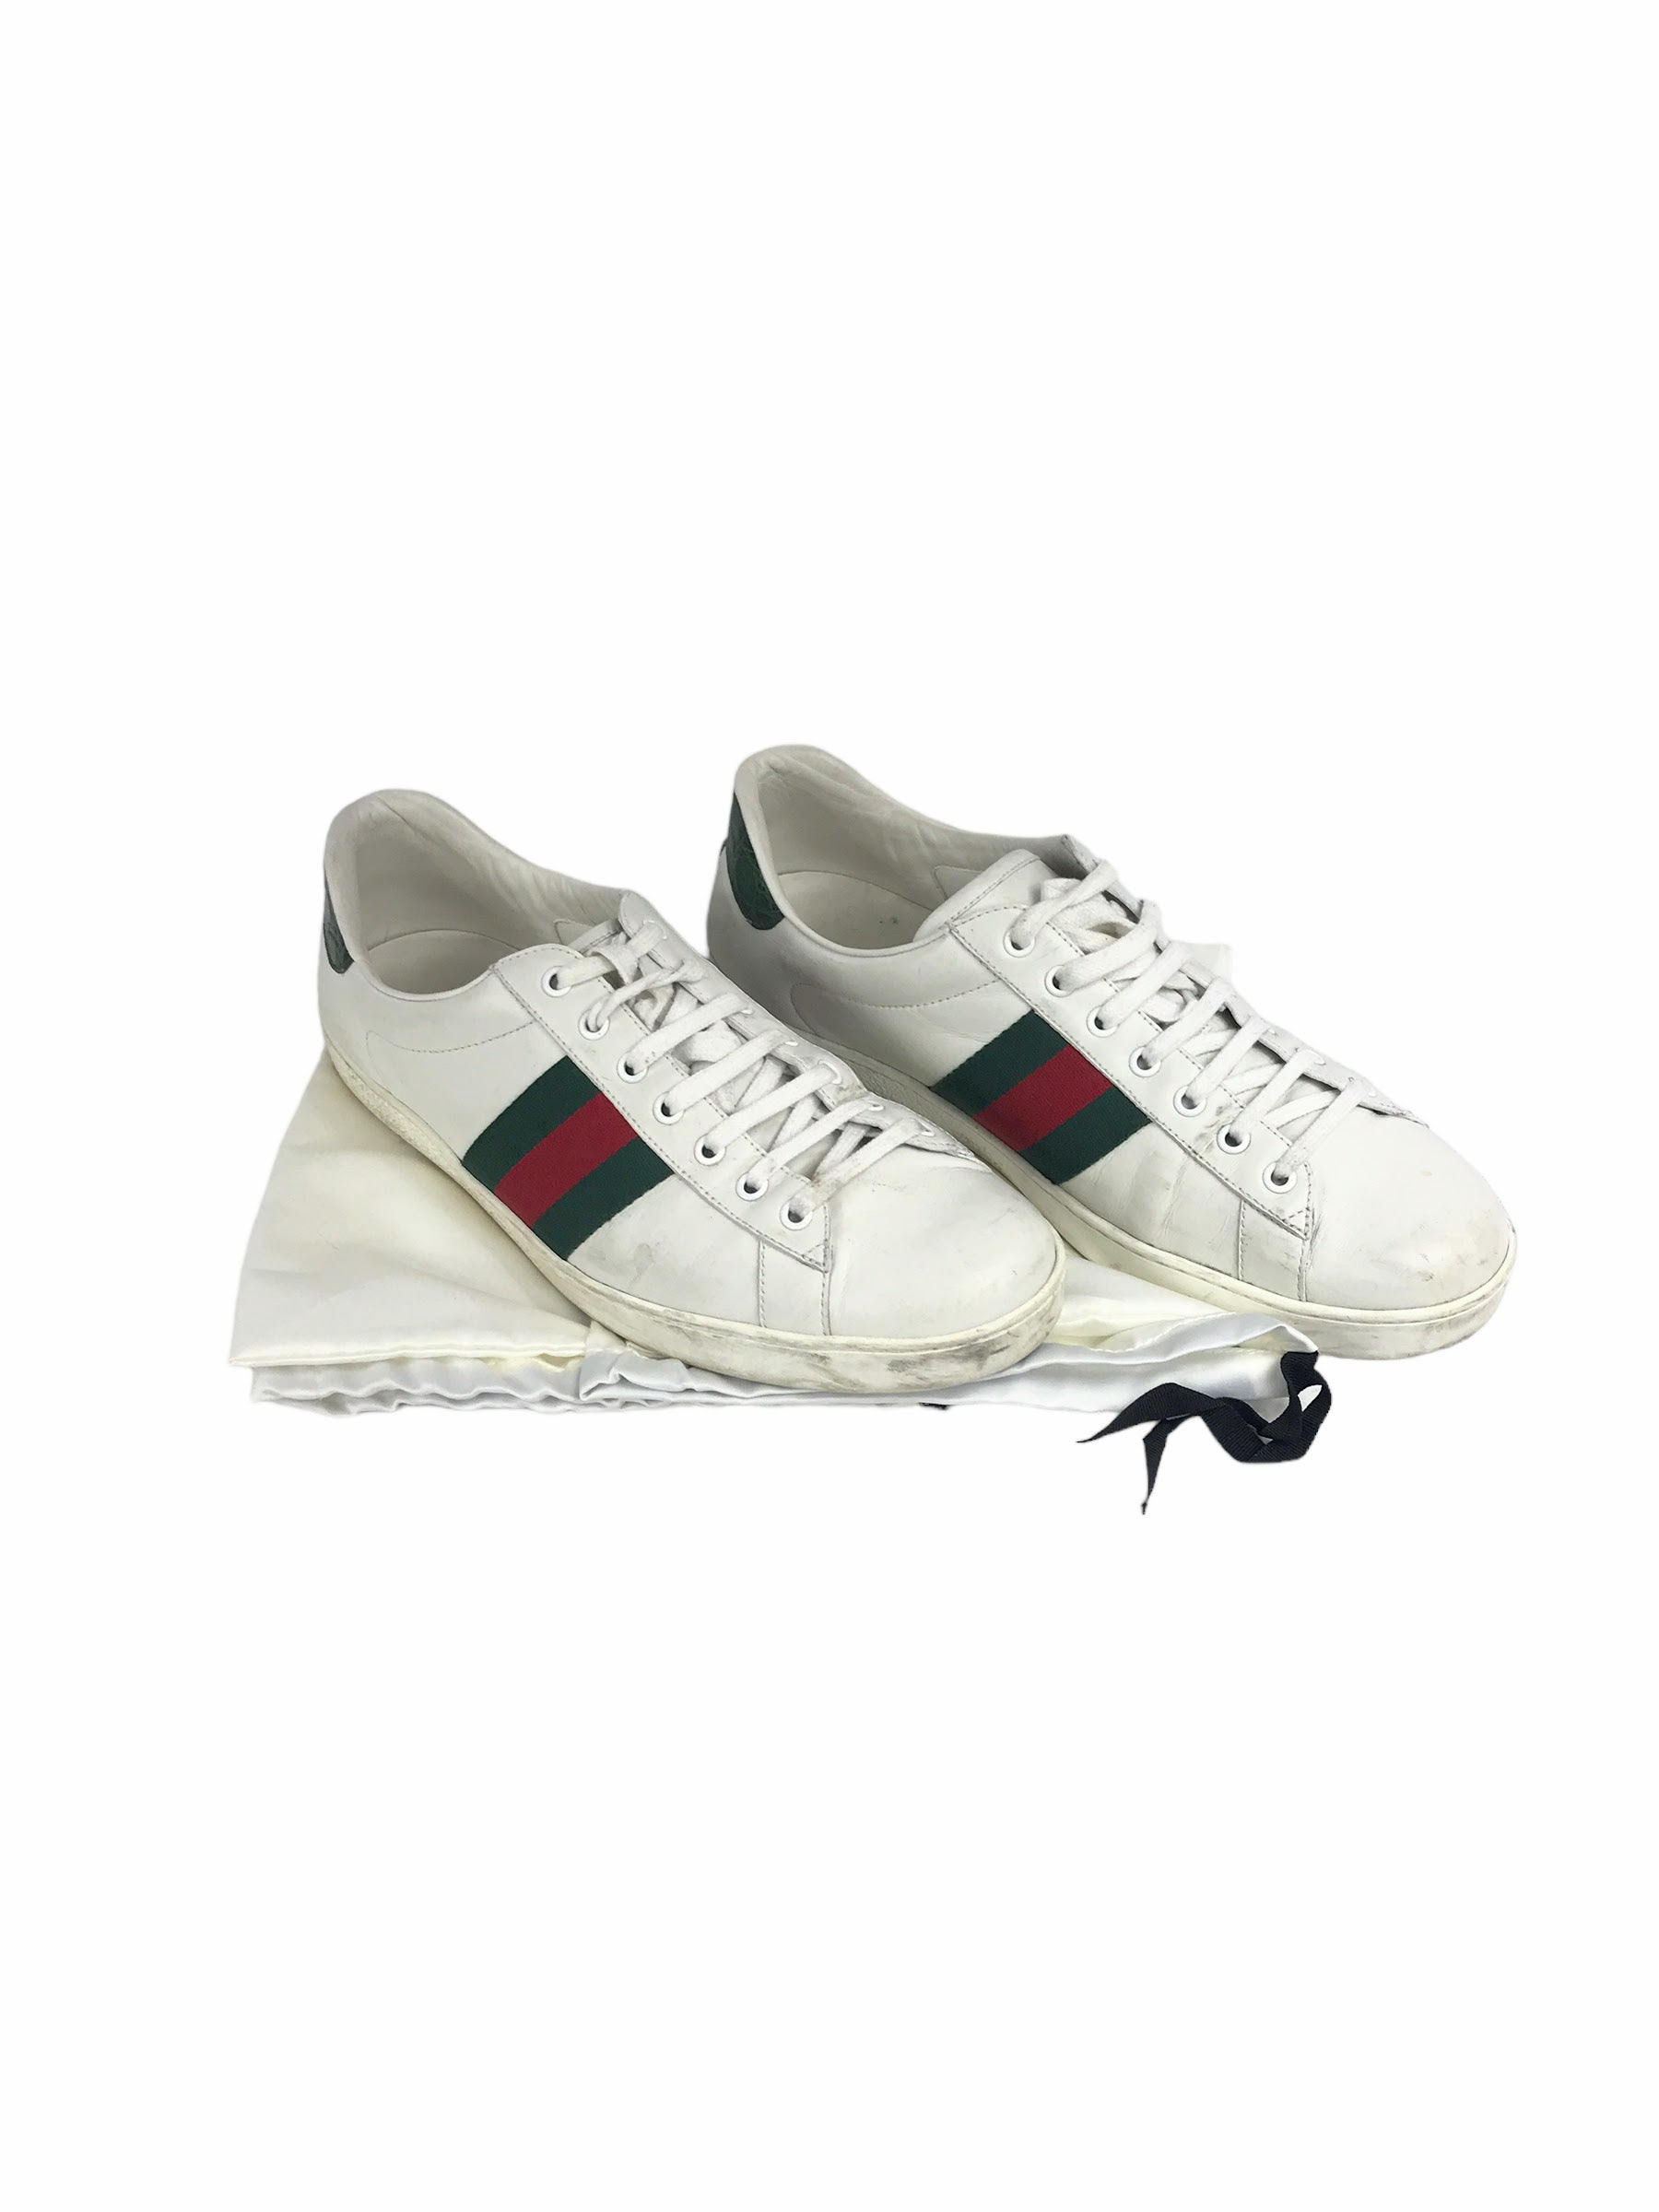 Men’s White Ace Supreme Sneakers w/ croc leather detail